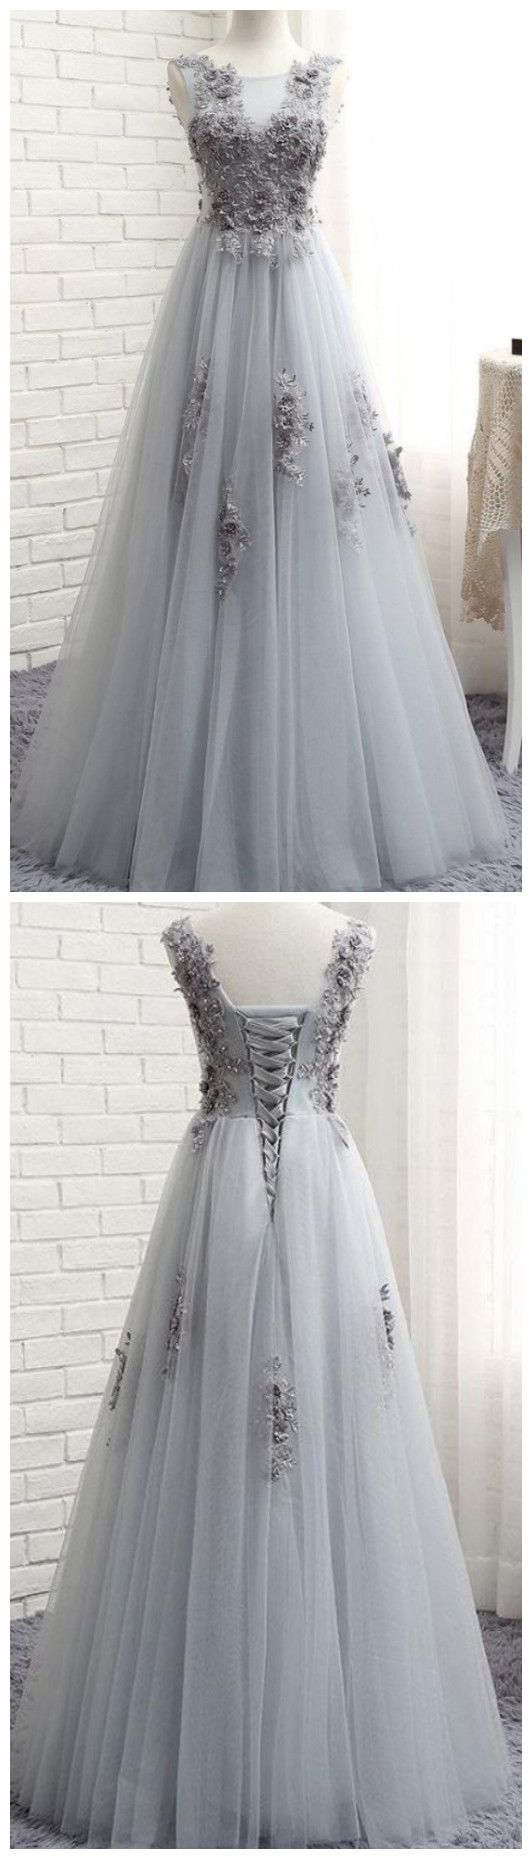 Tulle Jewel Neckline Floor-length A-line Prom Dresses With Lace Appliques